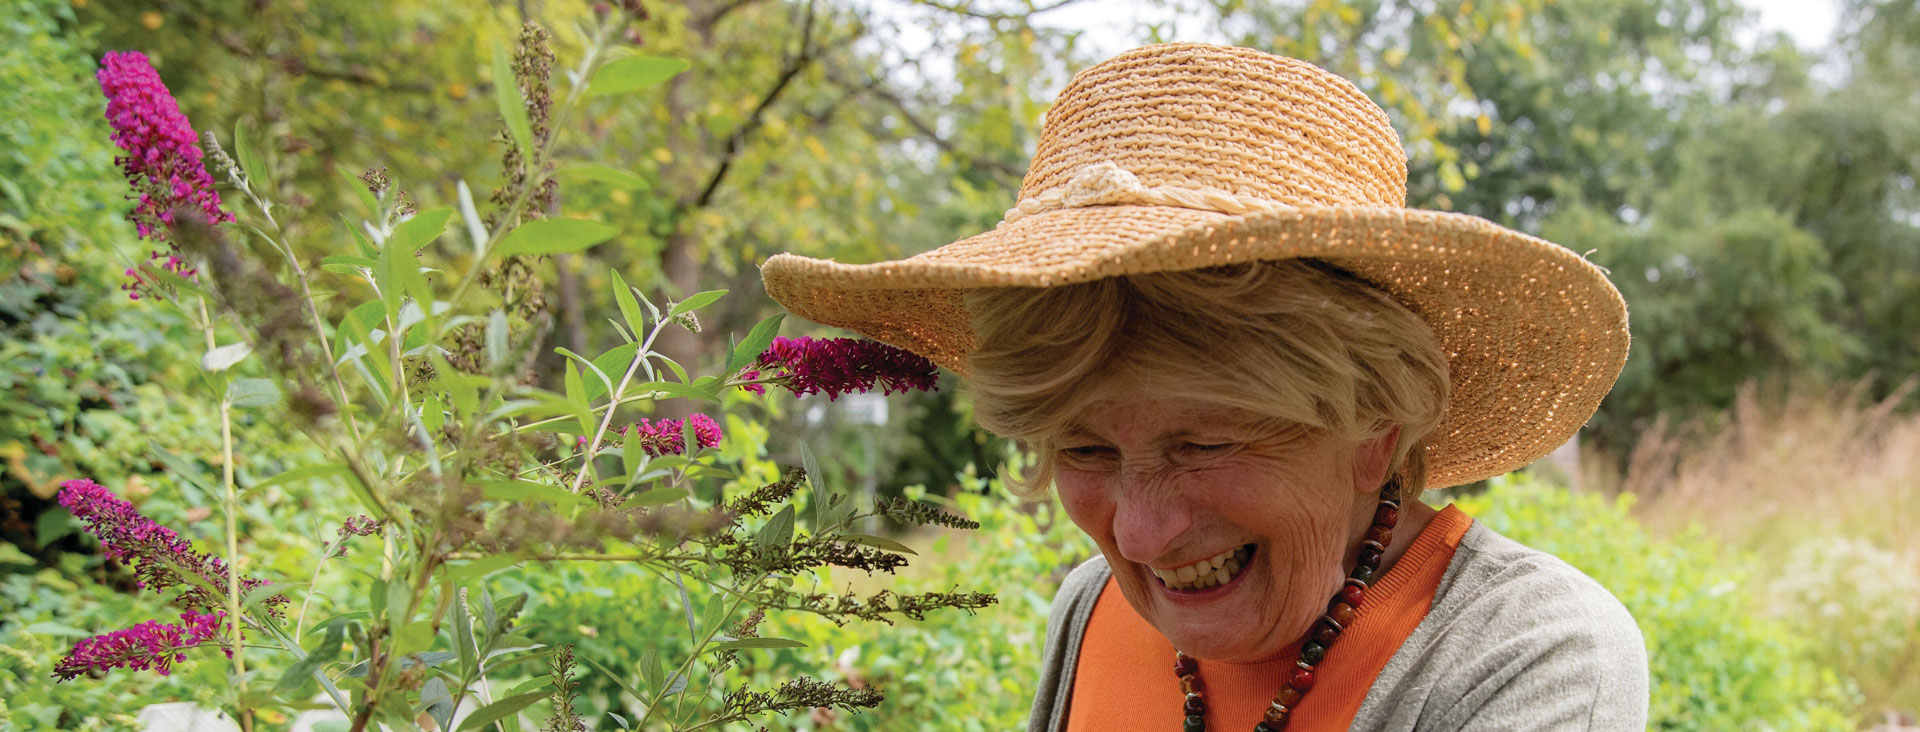 Christa a senior resident enjoying nature outside which is her passion